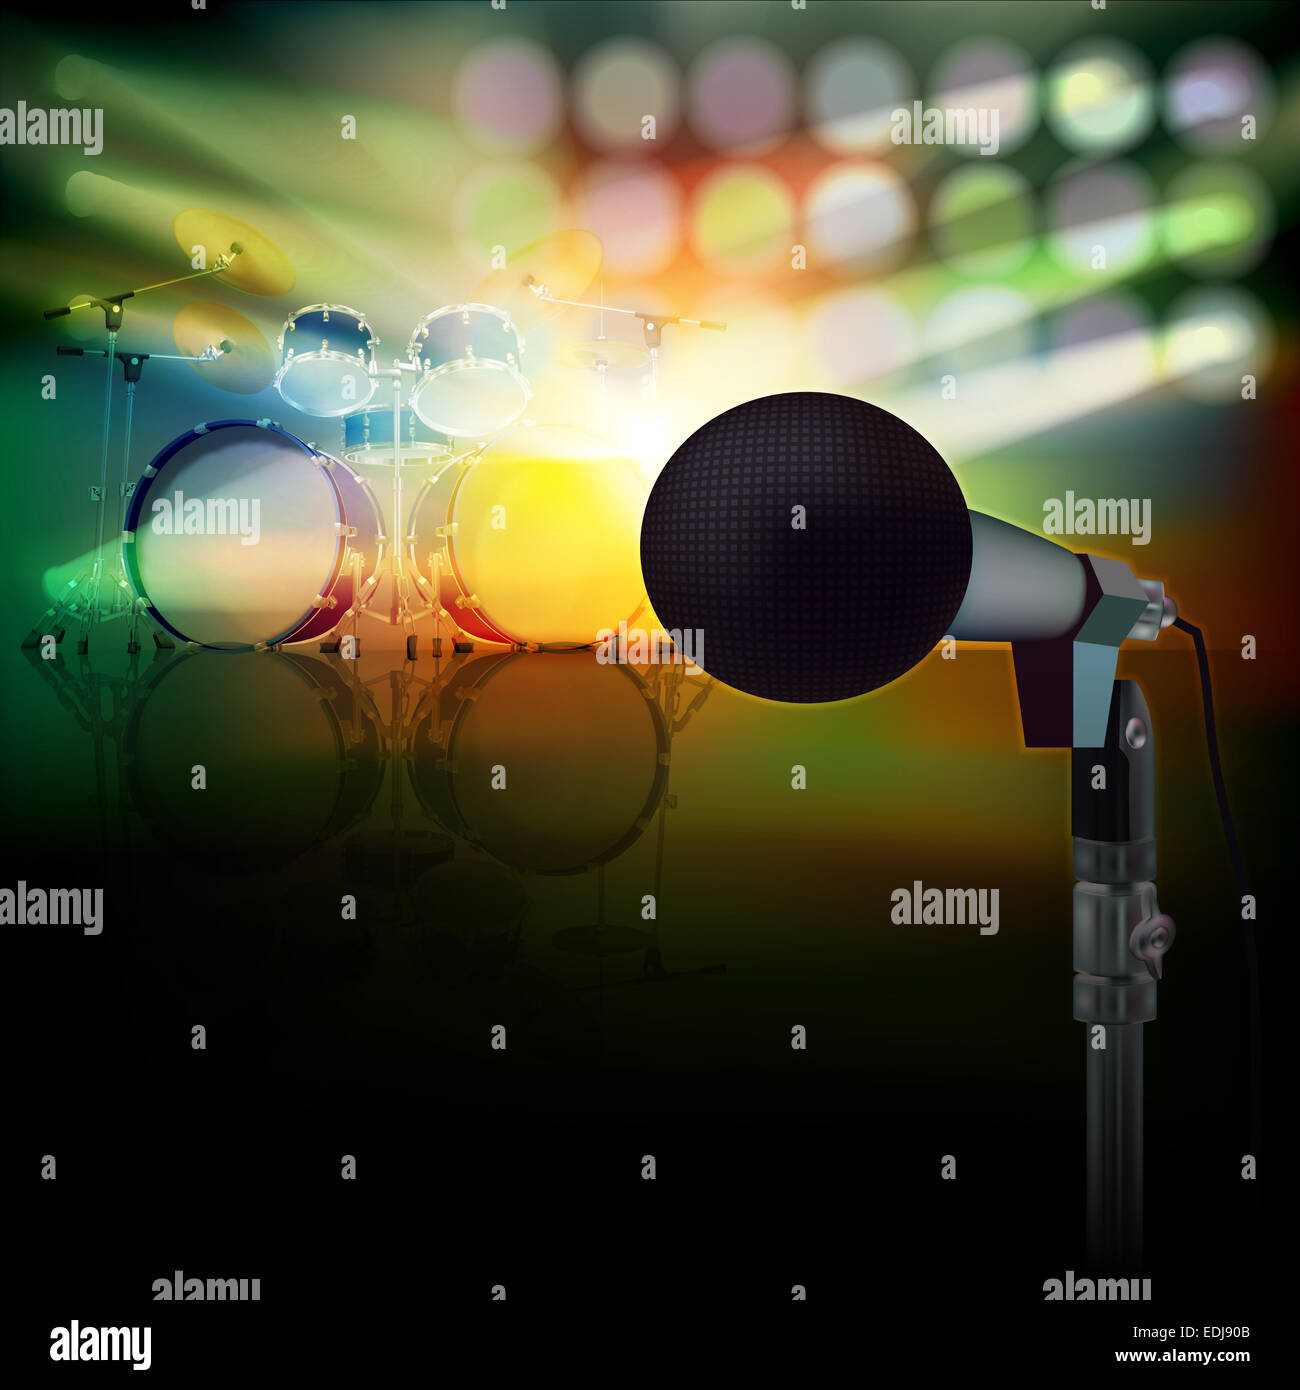 abstract background with drum kit and microphone on music stage Stock Photo